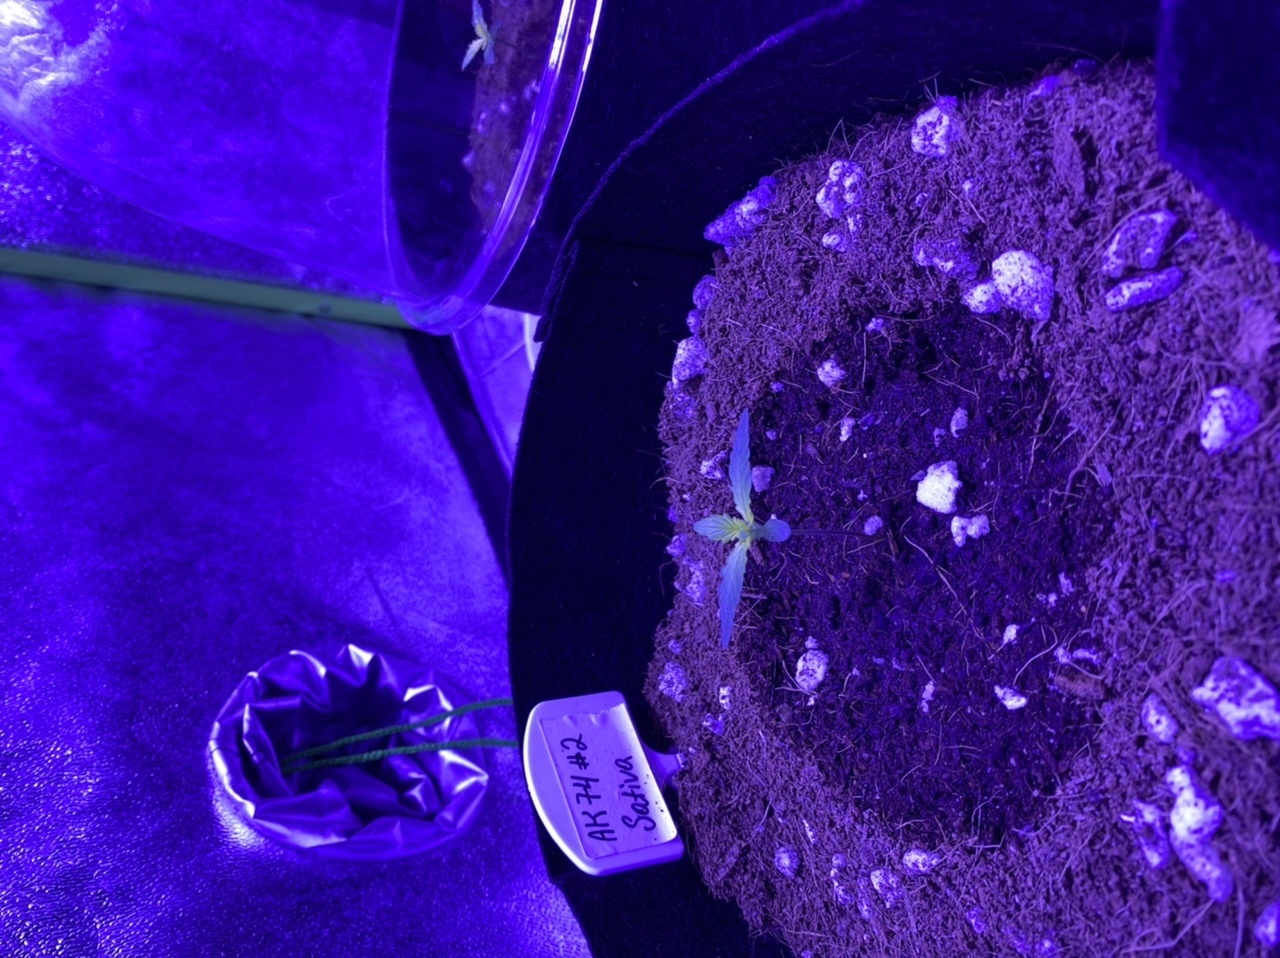 Help need assistance with identifying seedling problem new grower 3